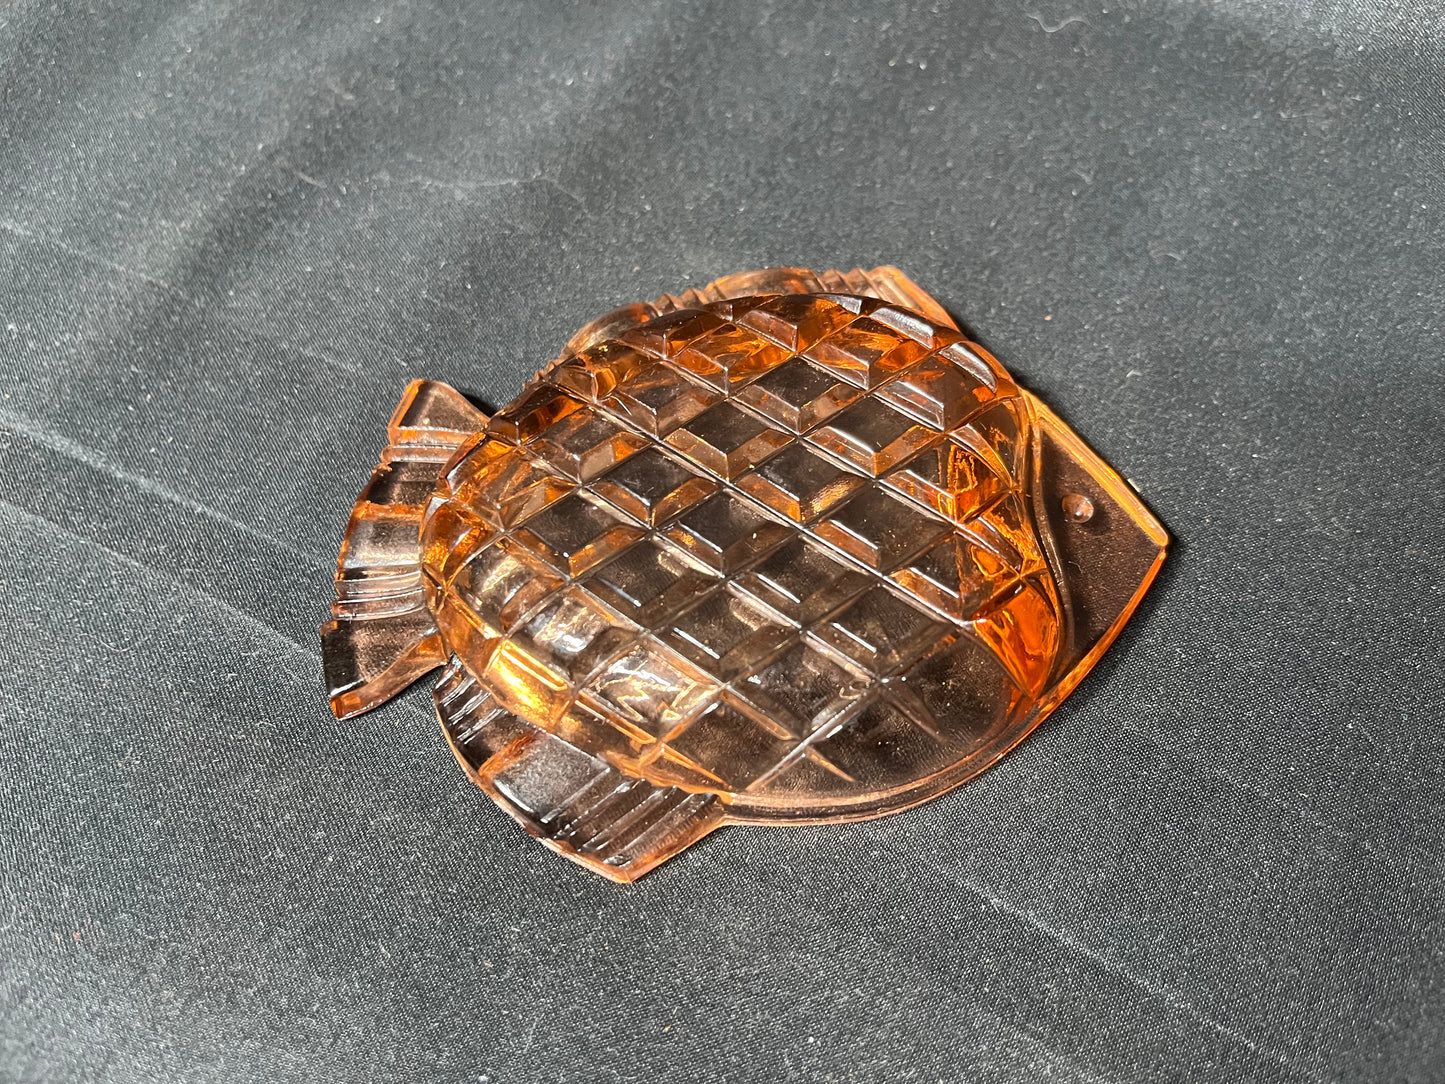 Coloured Glass Ash Tray Fish Shaped - Green, Blue, Orange, Pink